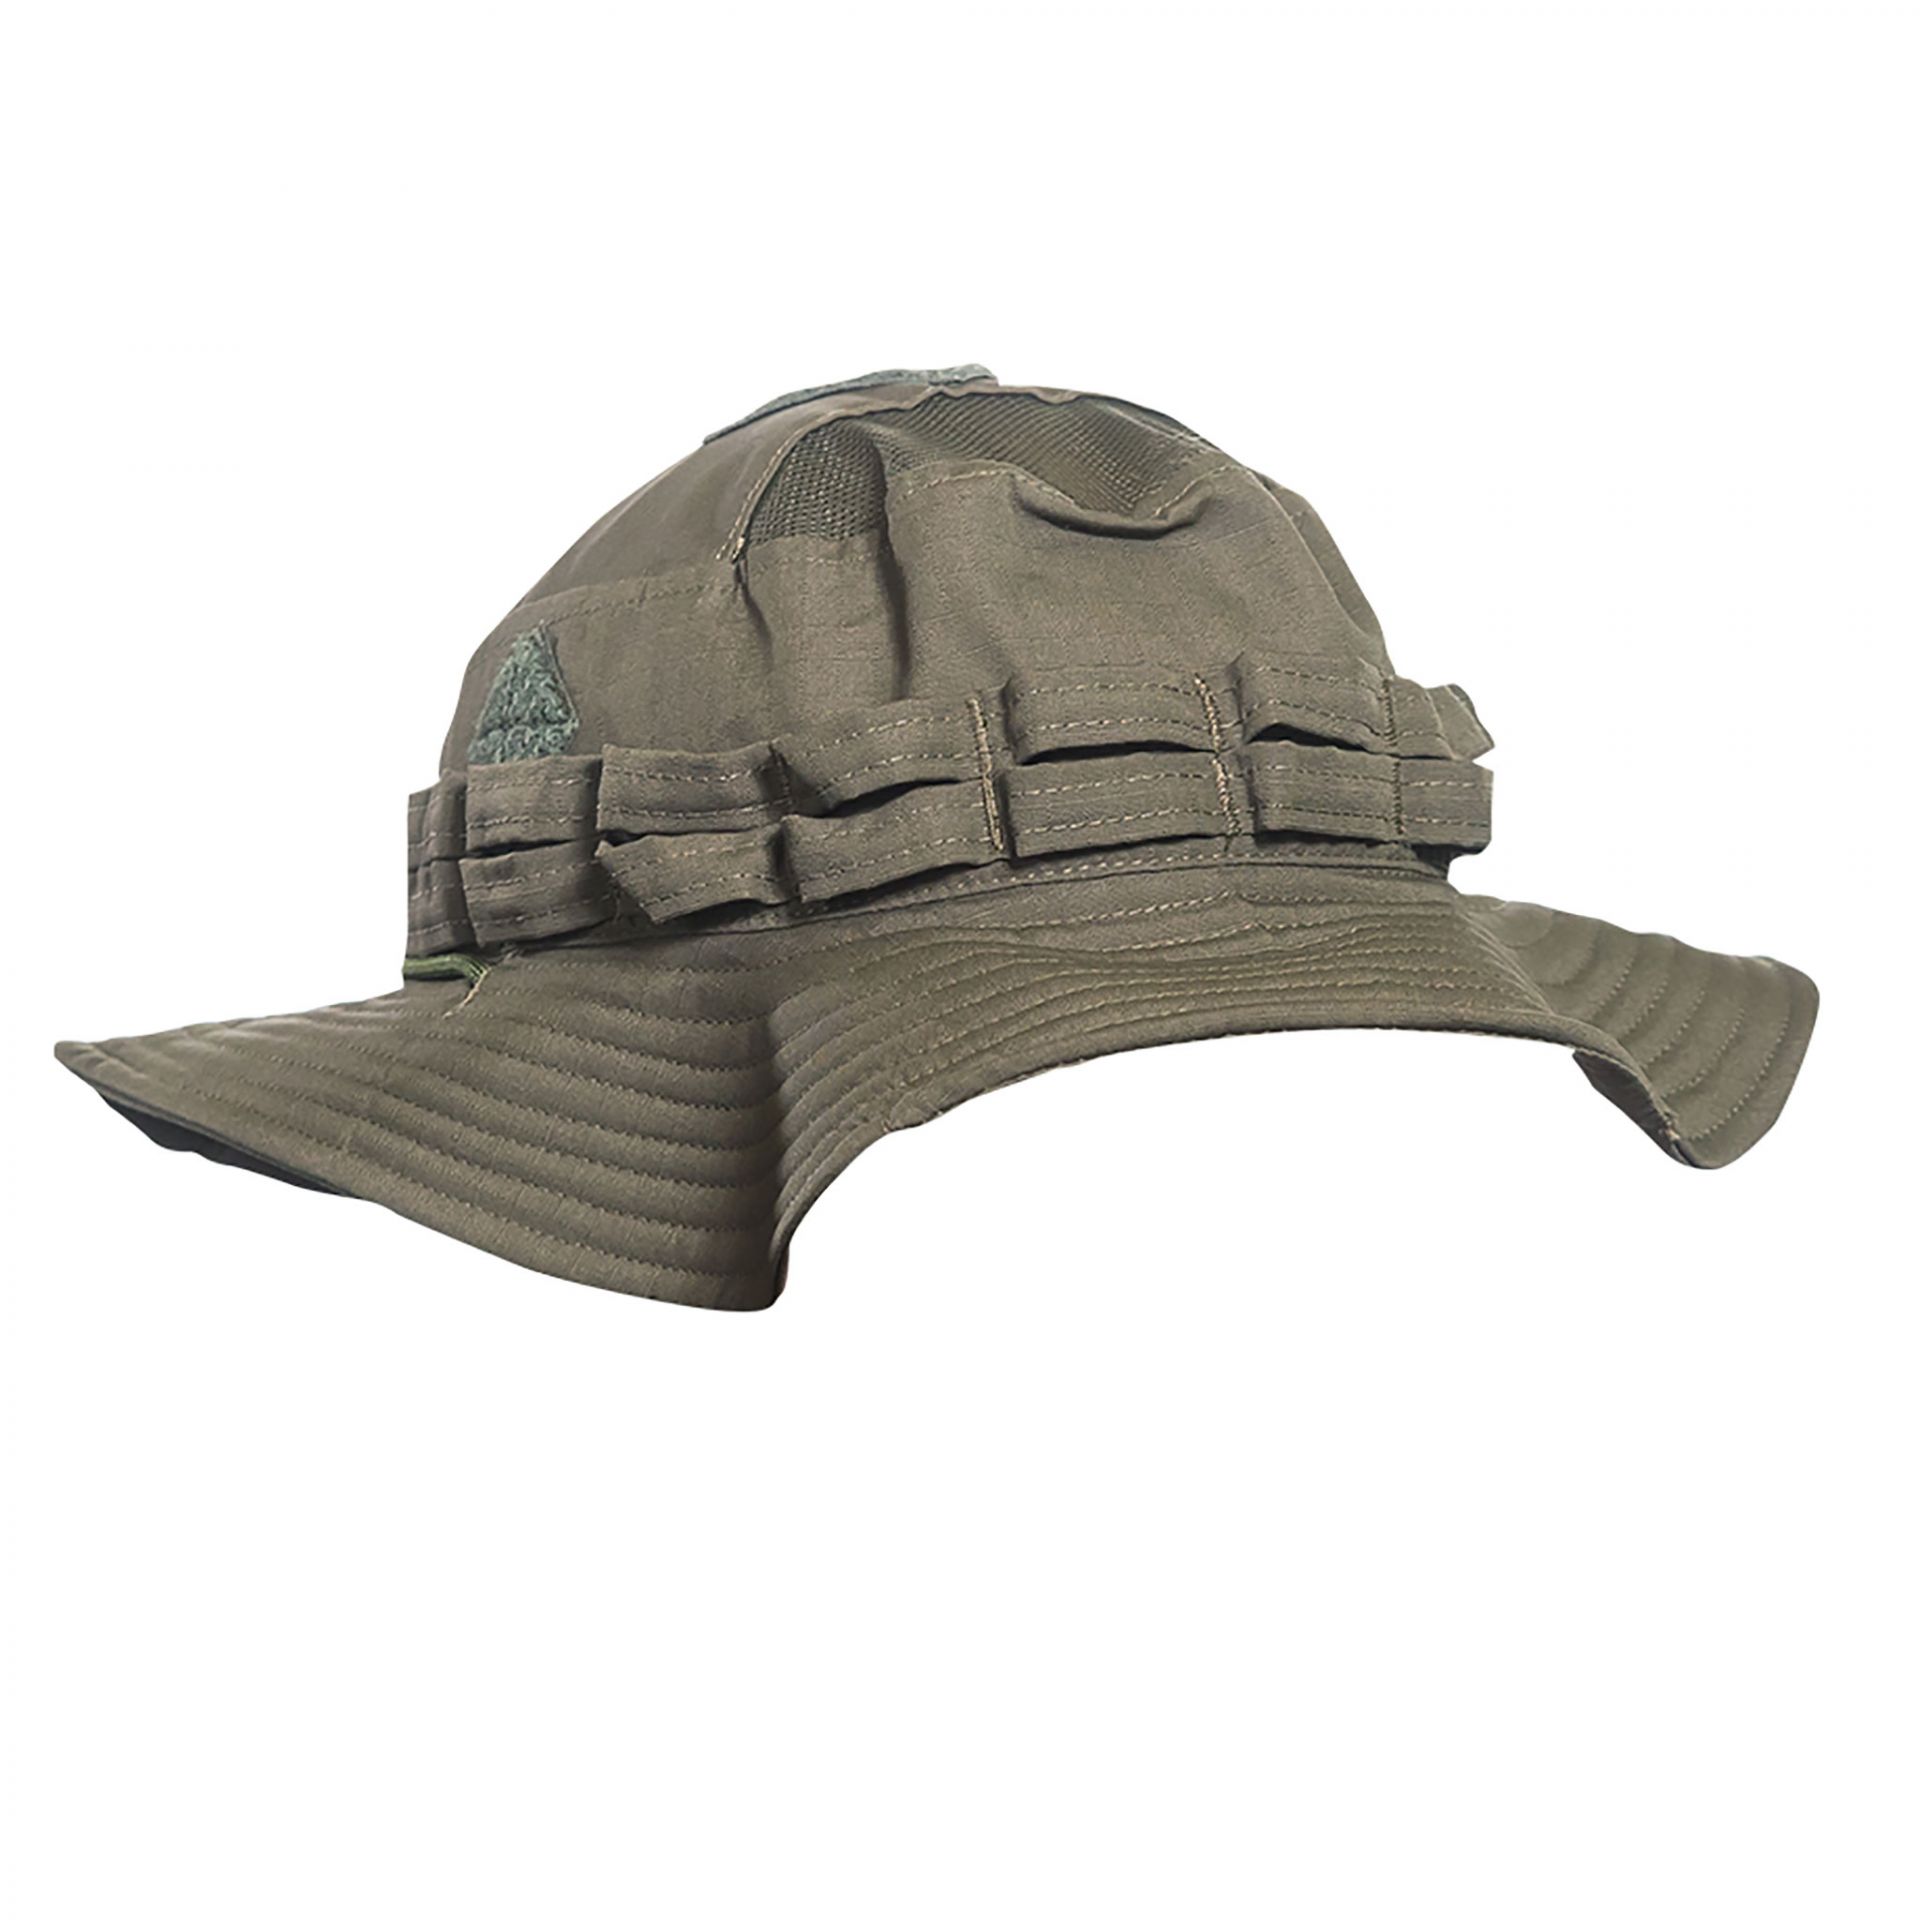 Boonie hat, Sun protection with mesh ventilation